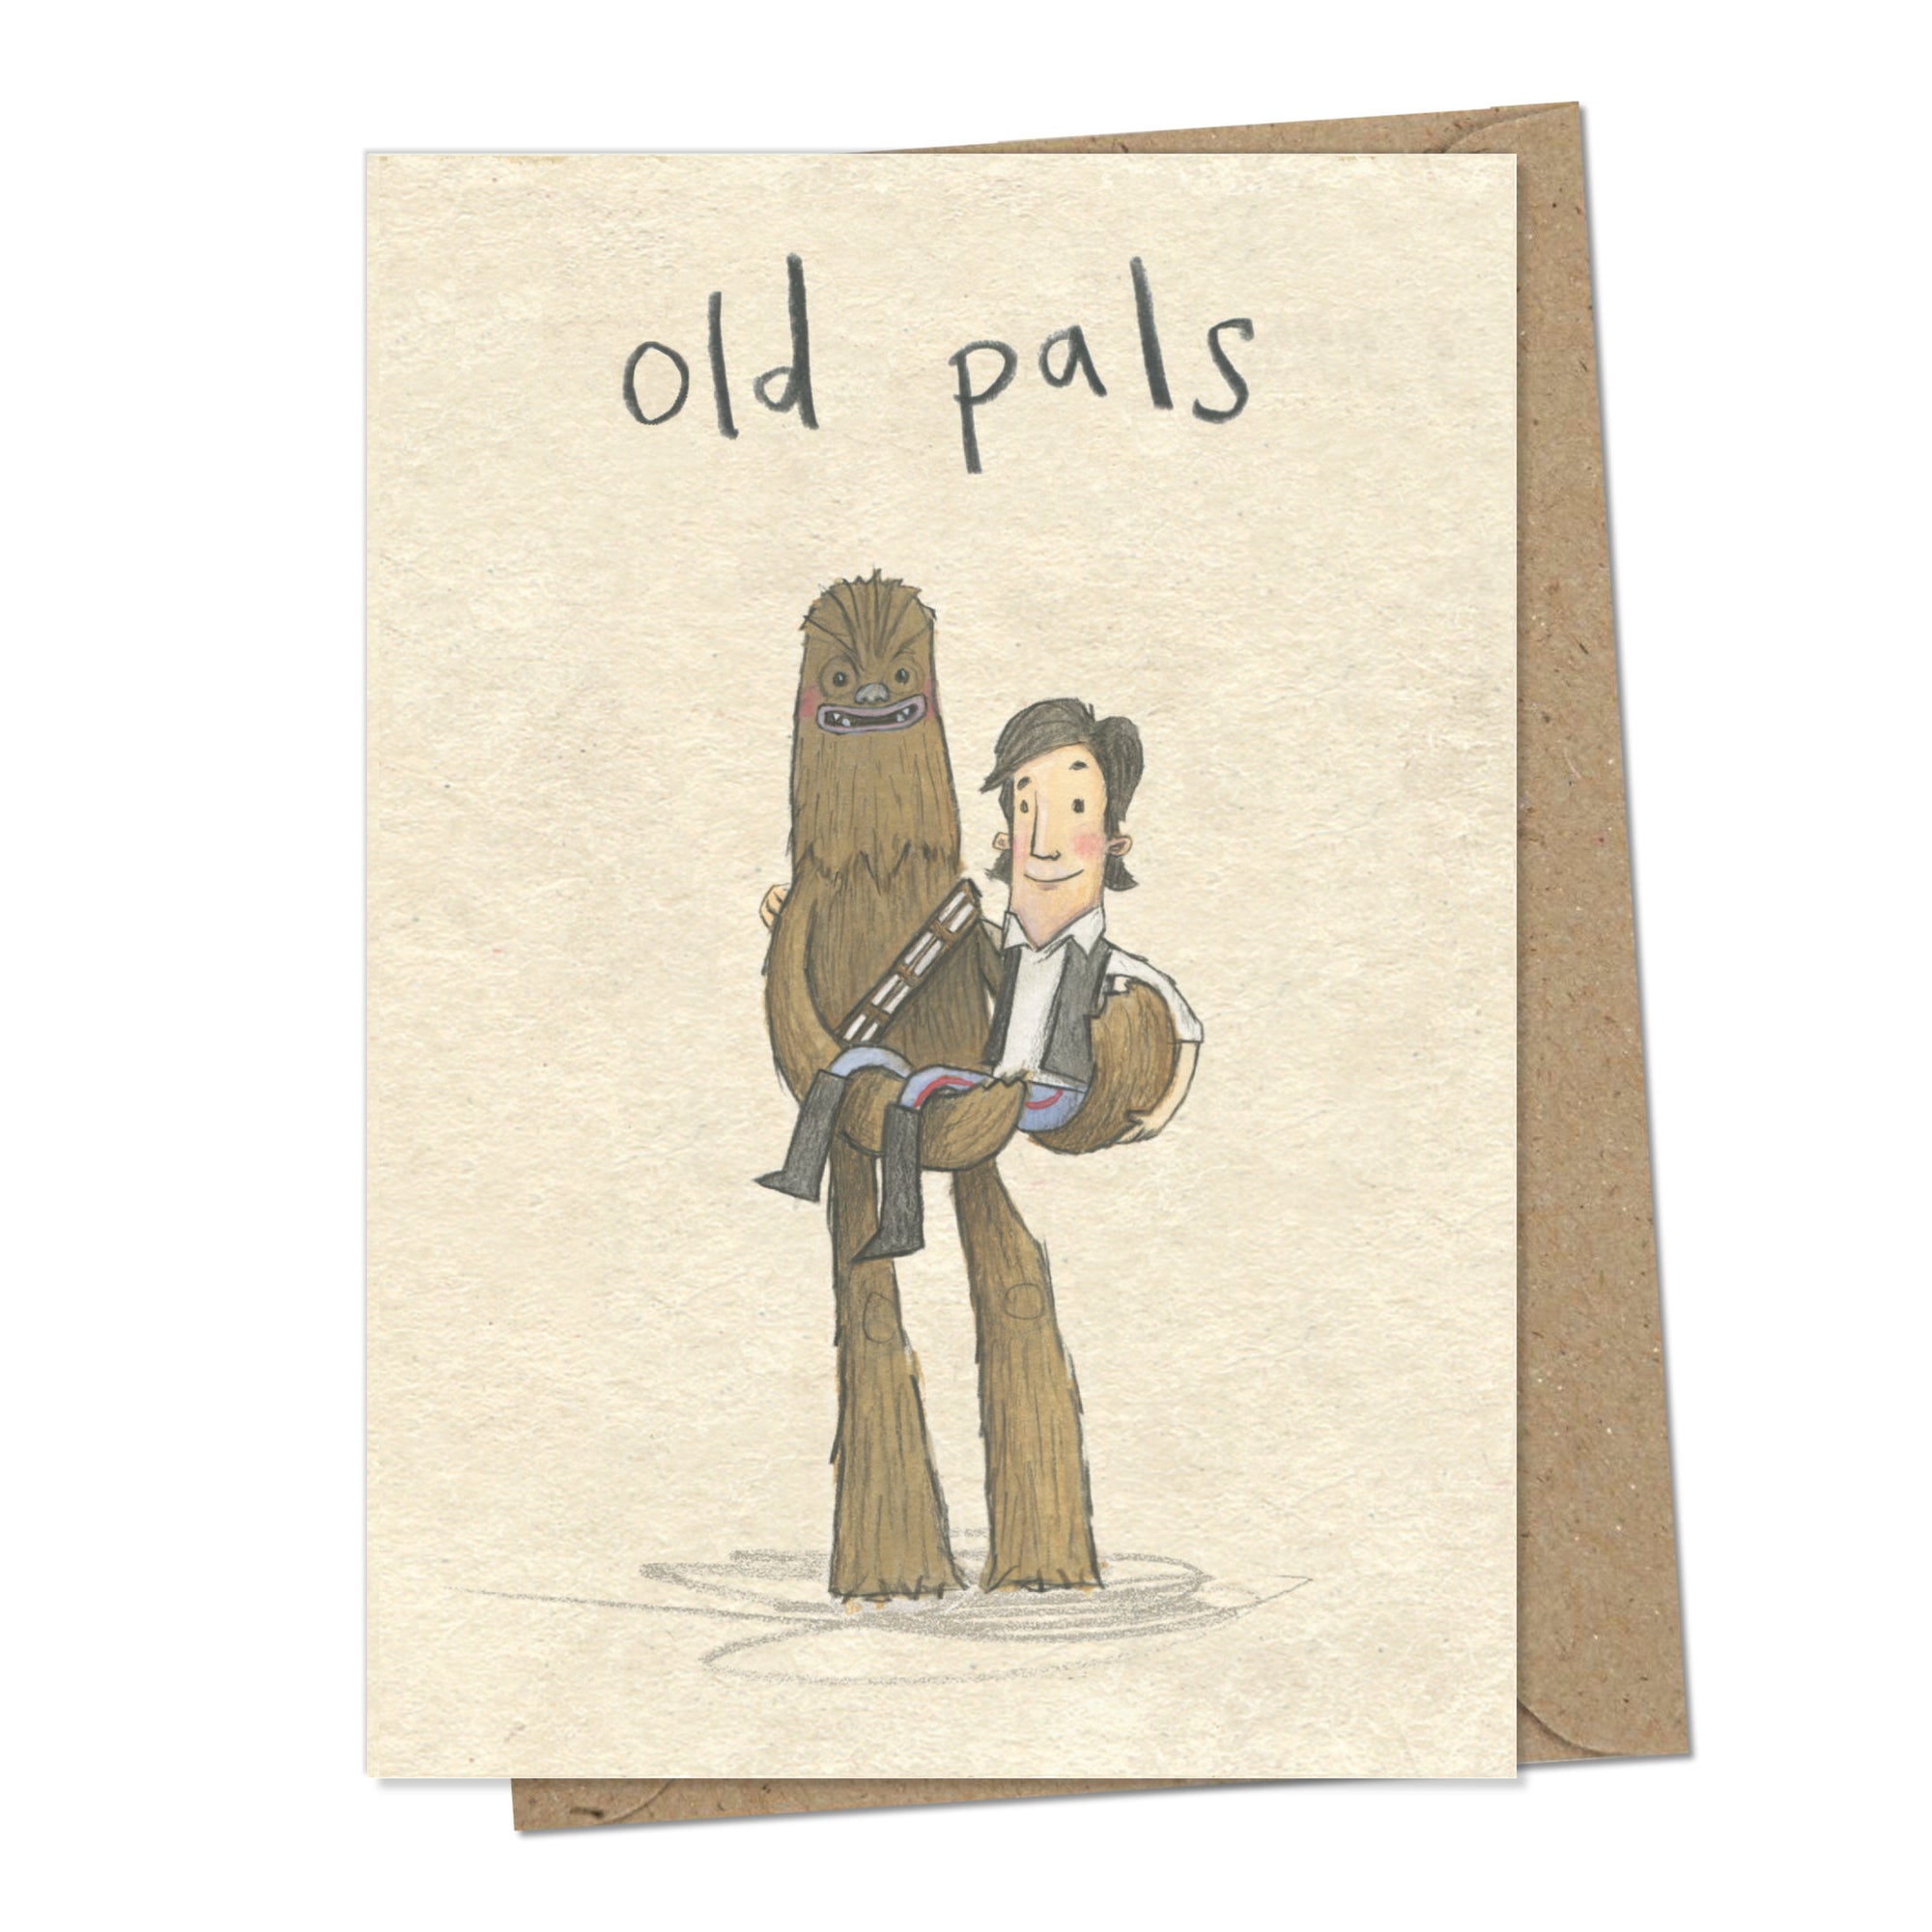 A greetings card with a mottled beige background and handwritten words above the illustration stating 'old pals'. The illustration is of characters from the movie star wars - Chewie carrying Han Solo and them both smiling.